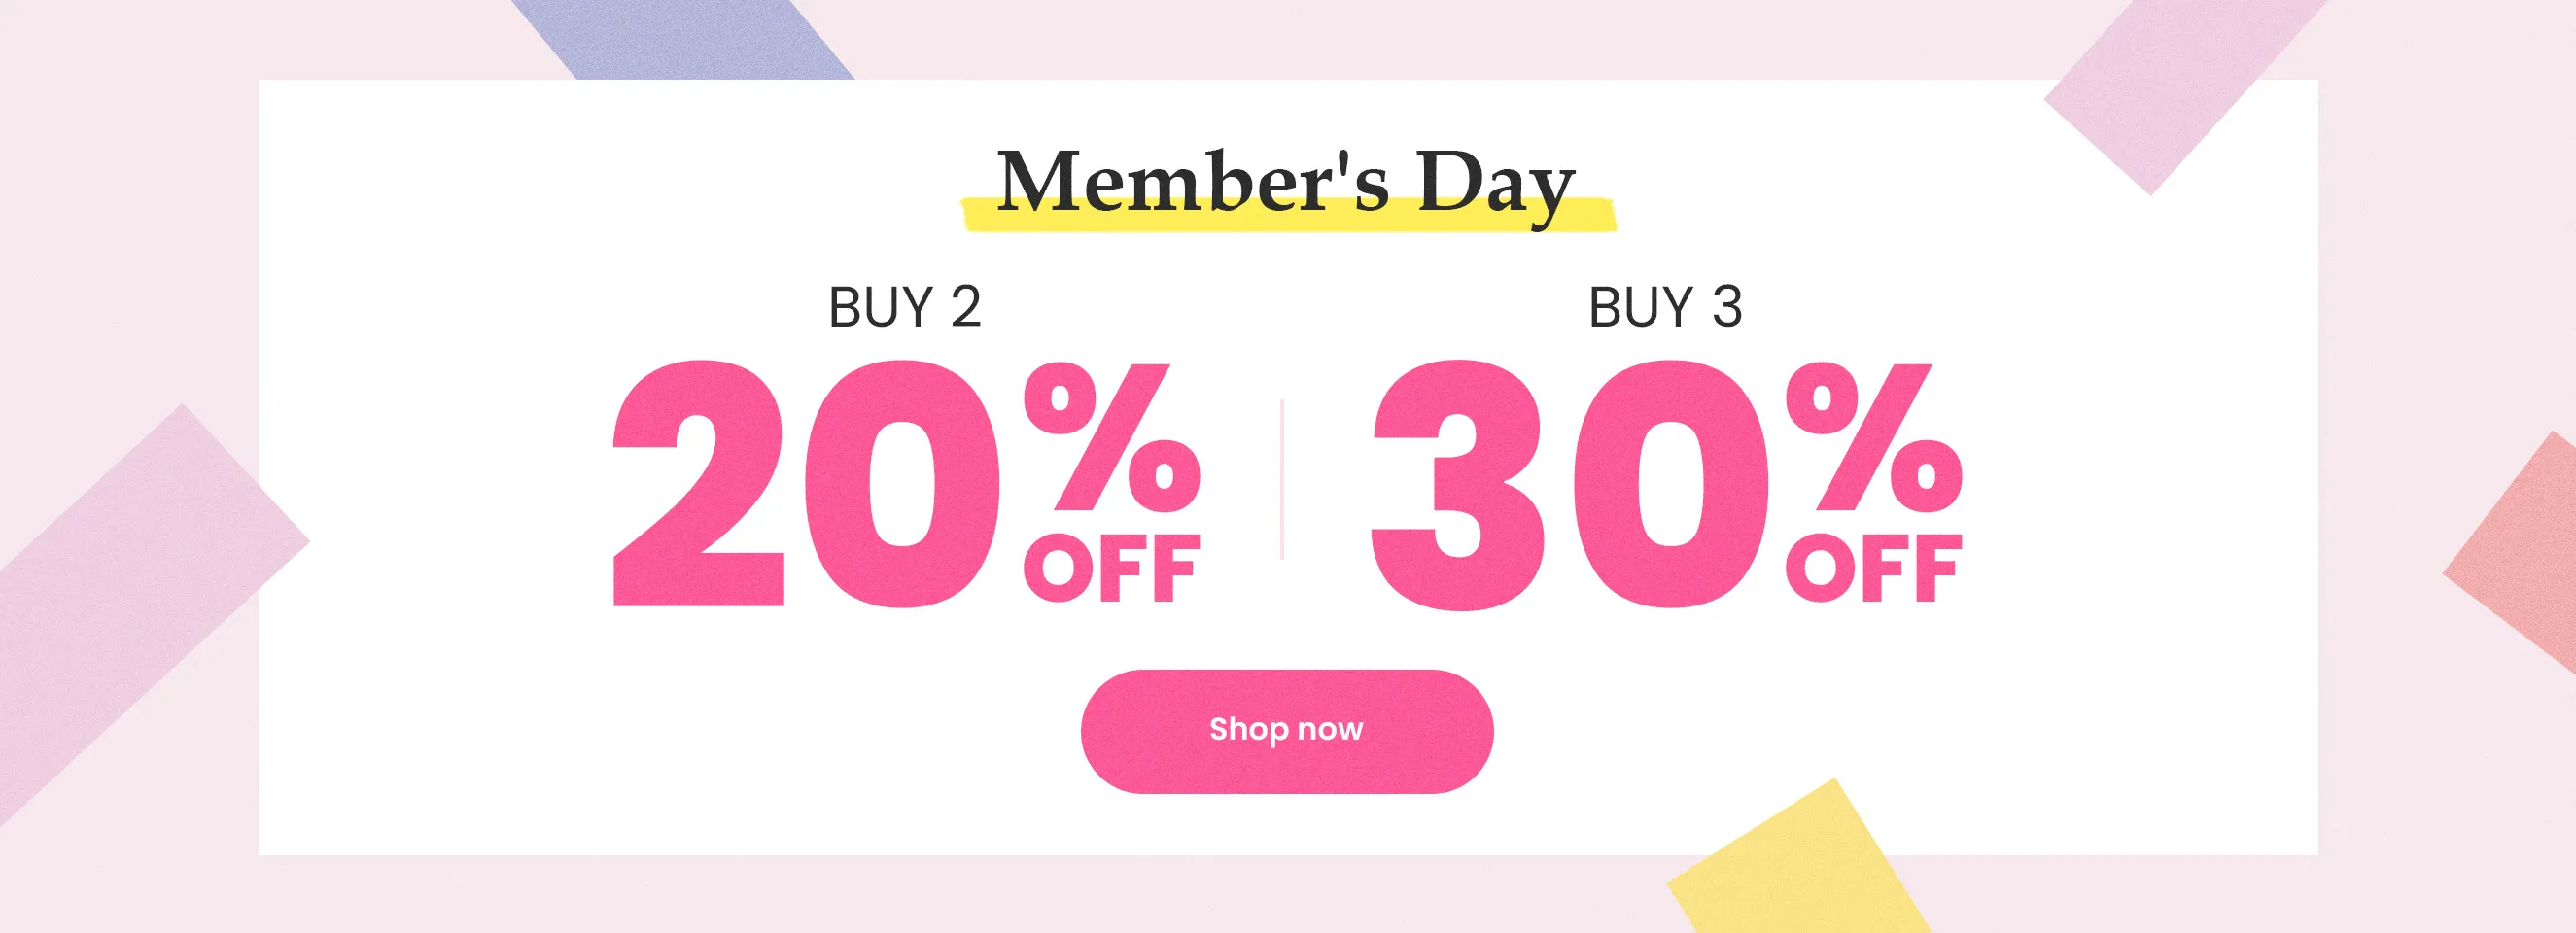 Click it to join Member's Day activity